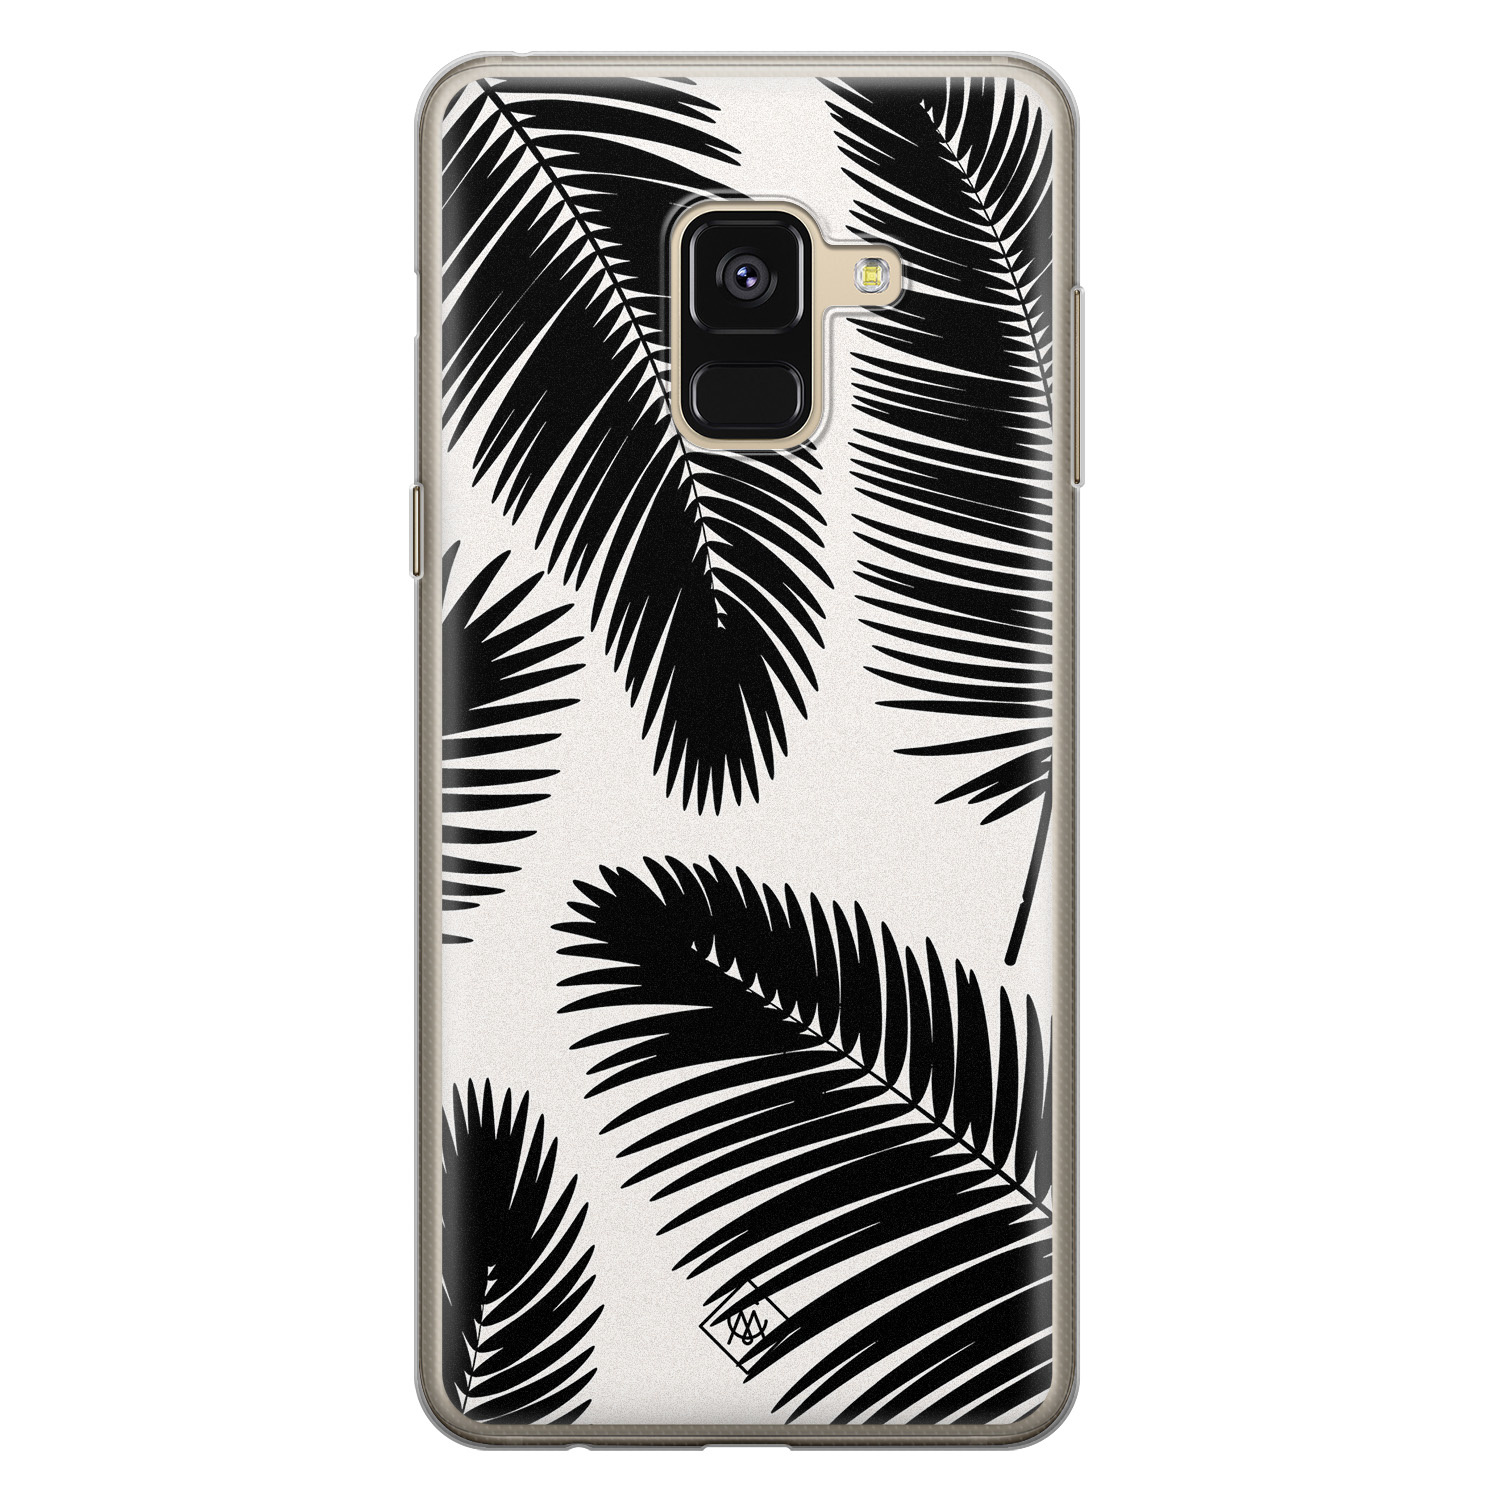 Samsung Galaxy A8 (2018) siliconen telefoonhoesje - Palm leaves silhouette